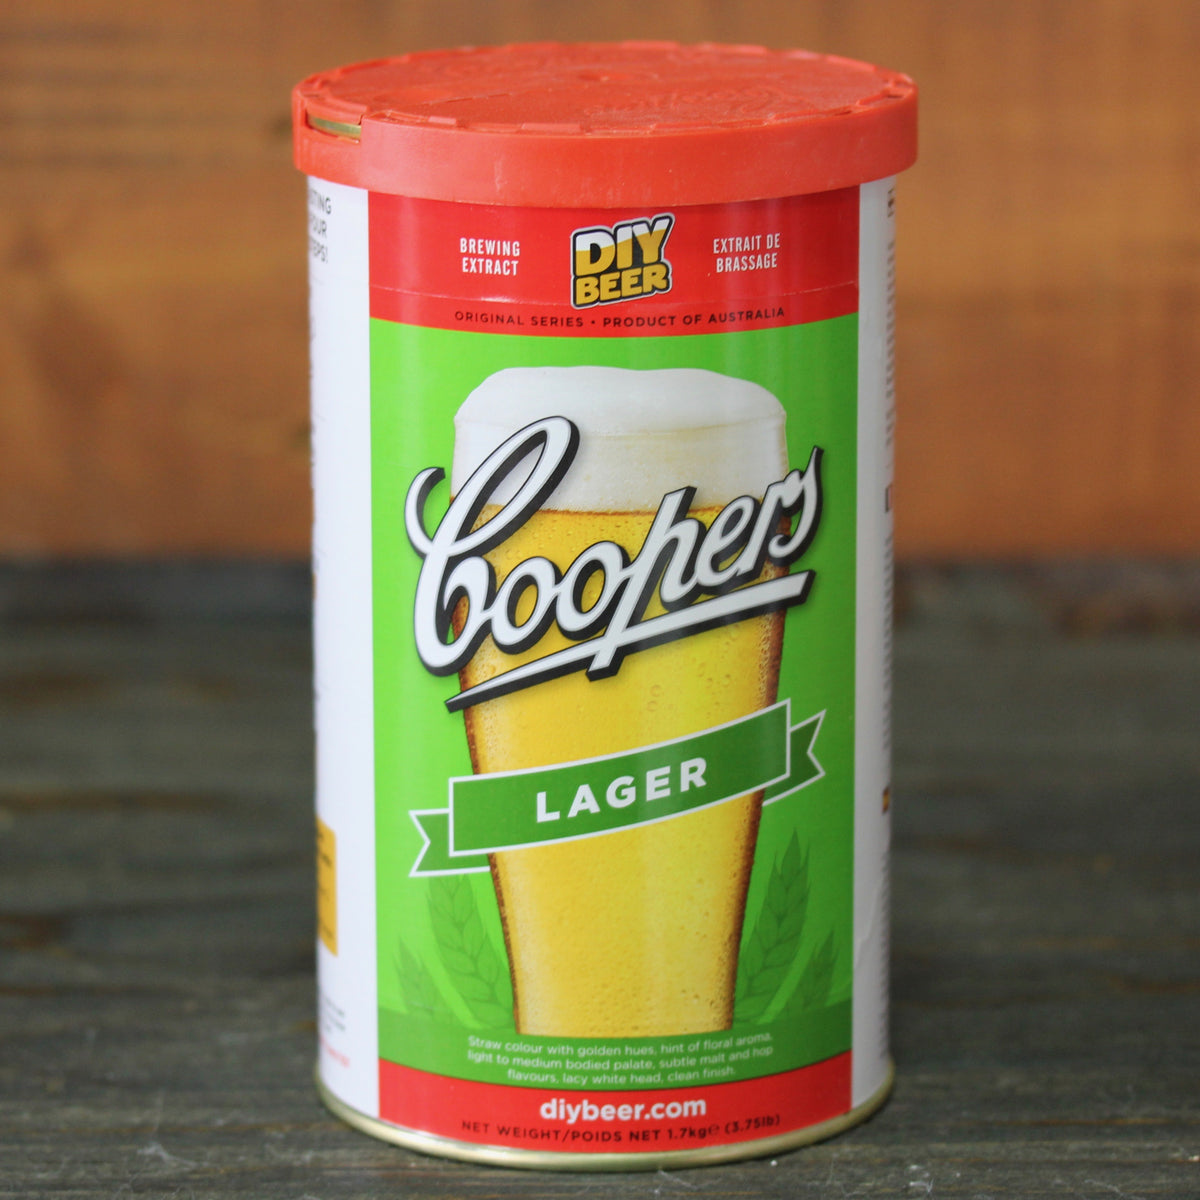 Coopers Beer Kit - Lager